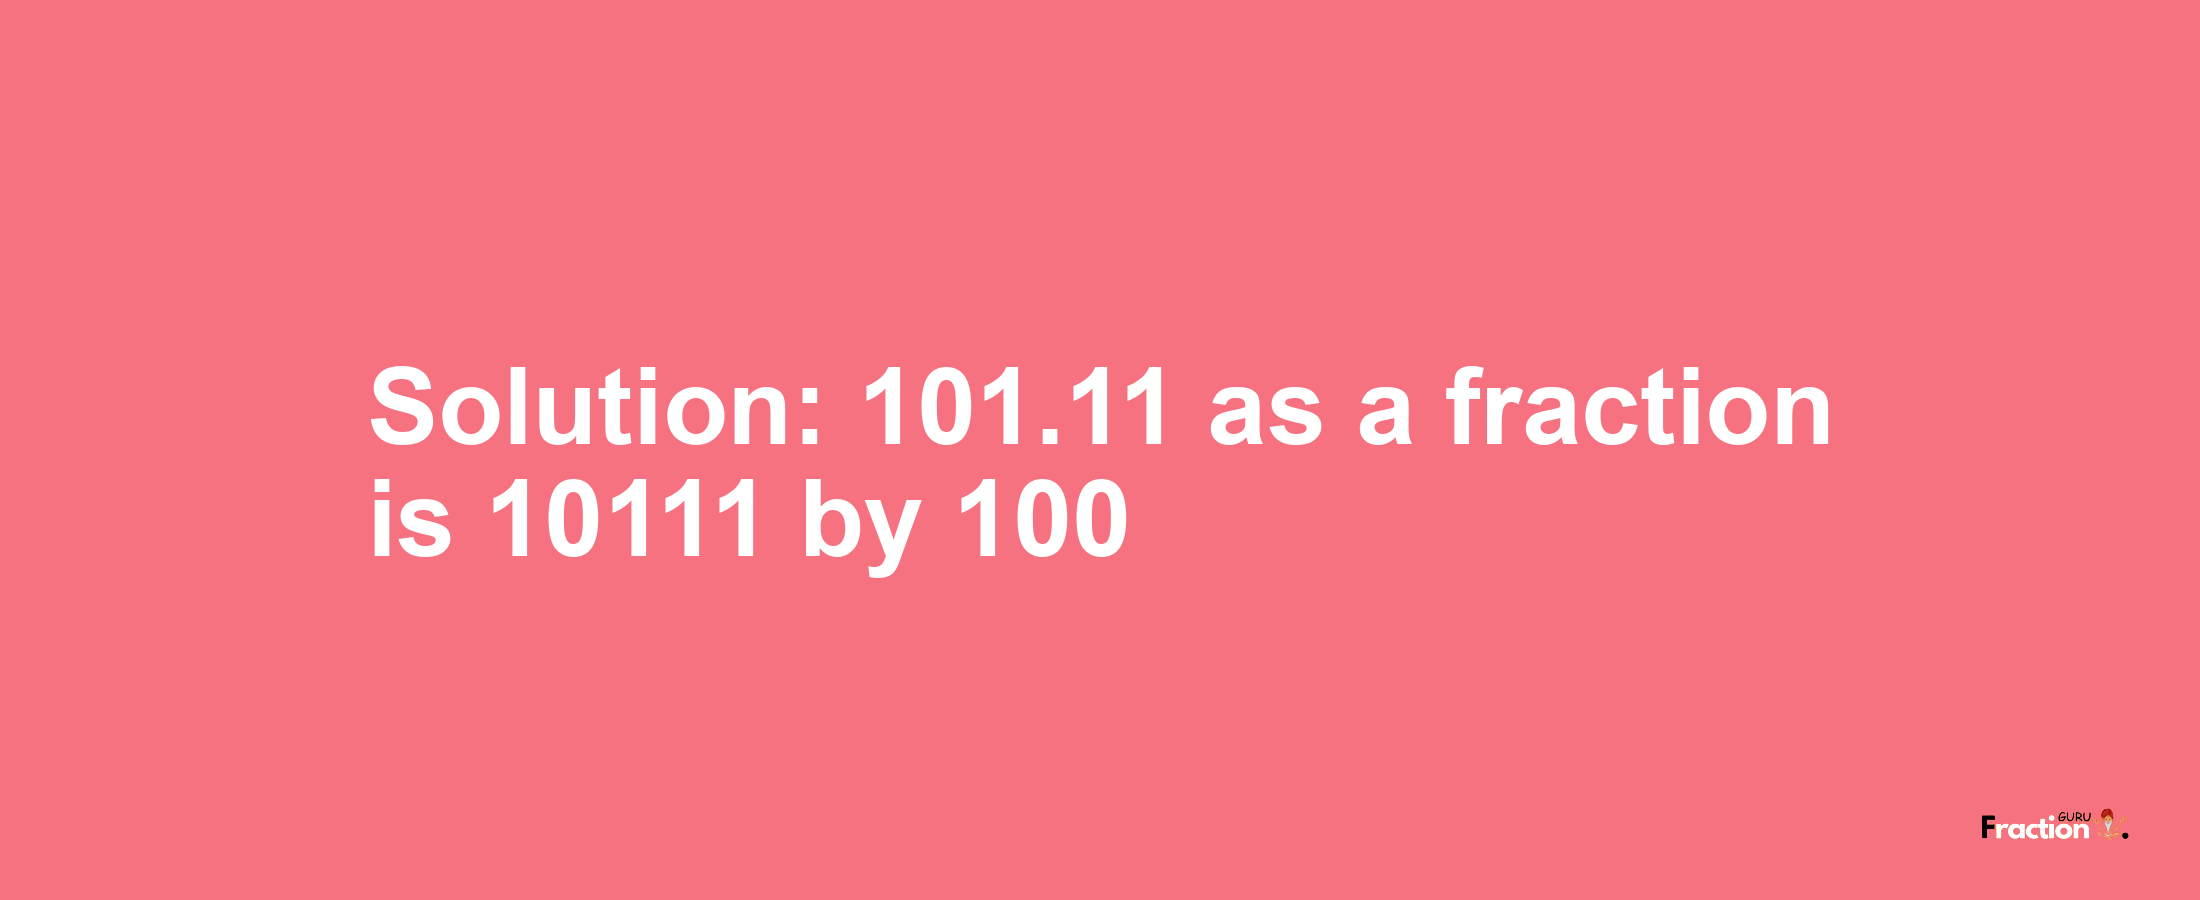 Solution:101.11 as a fraction is 10111/100